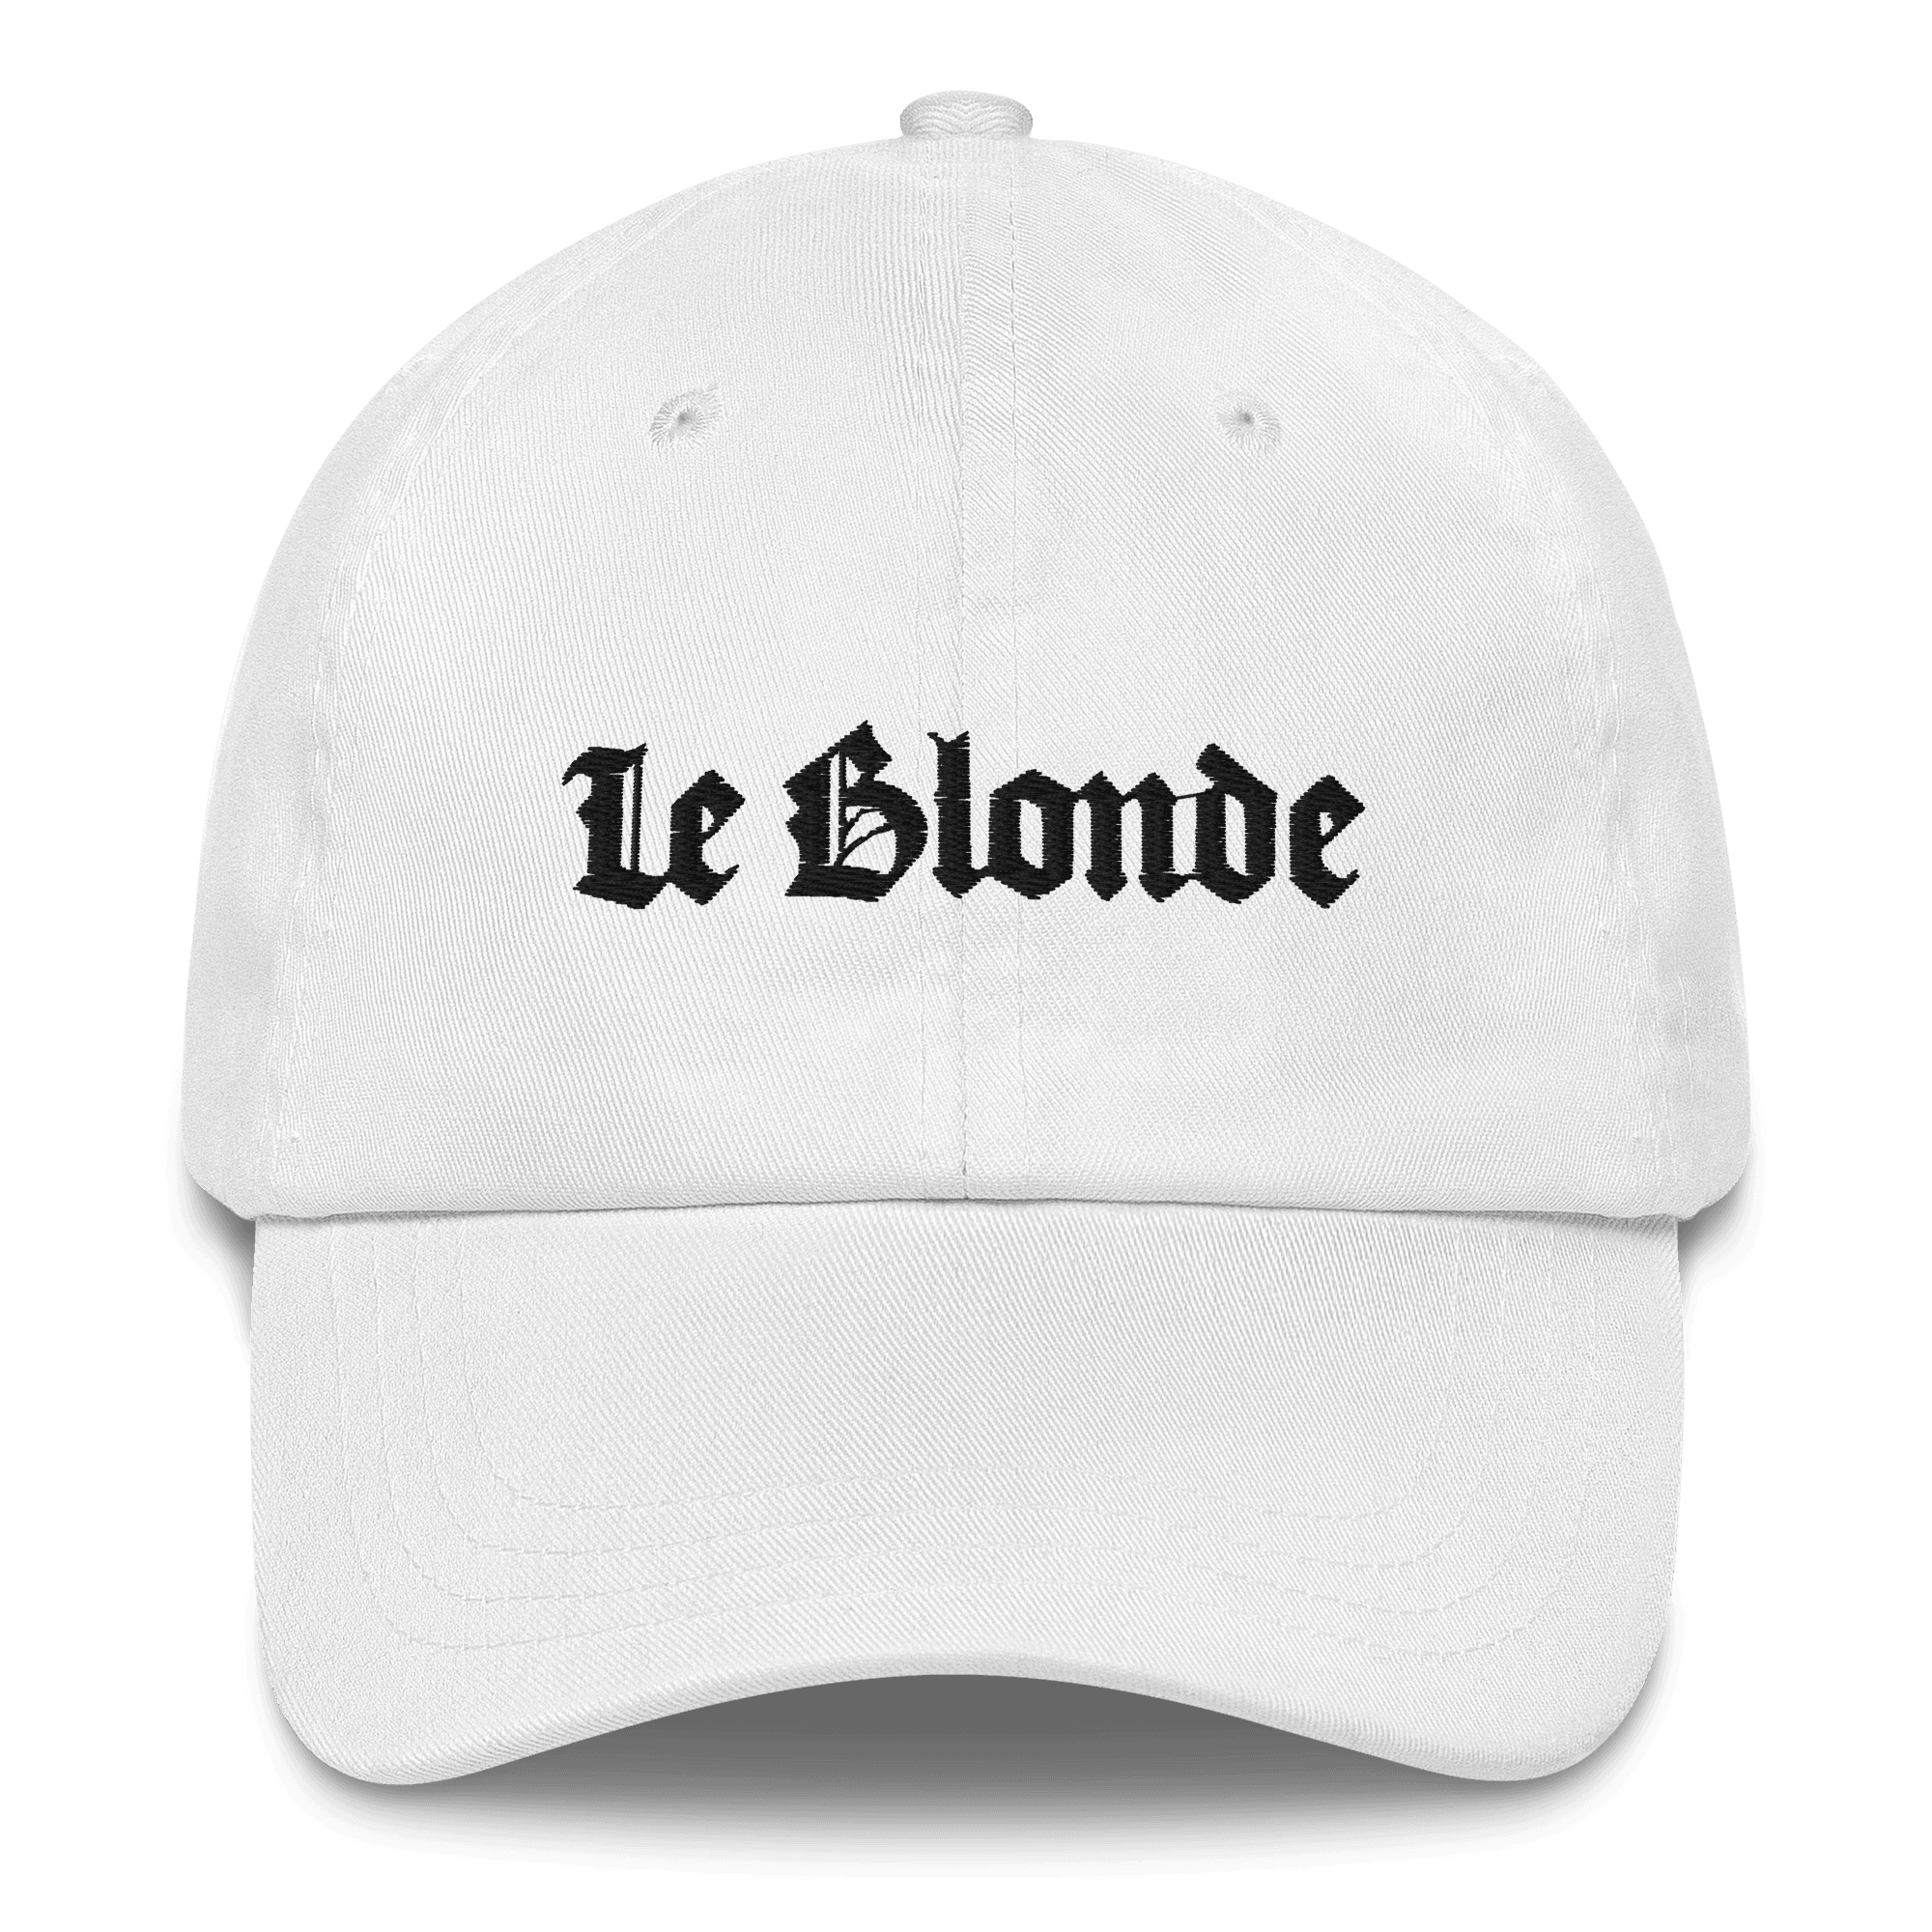 Le Blonde Embroidered Hat - Polychrome Goods 🍊